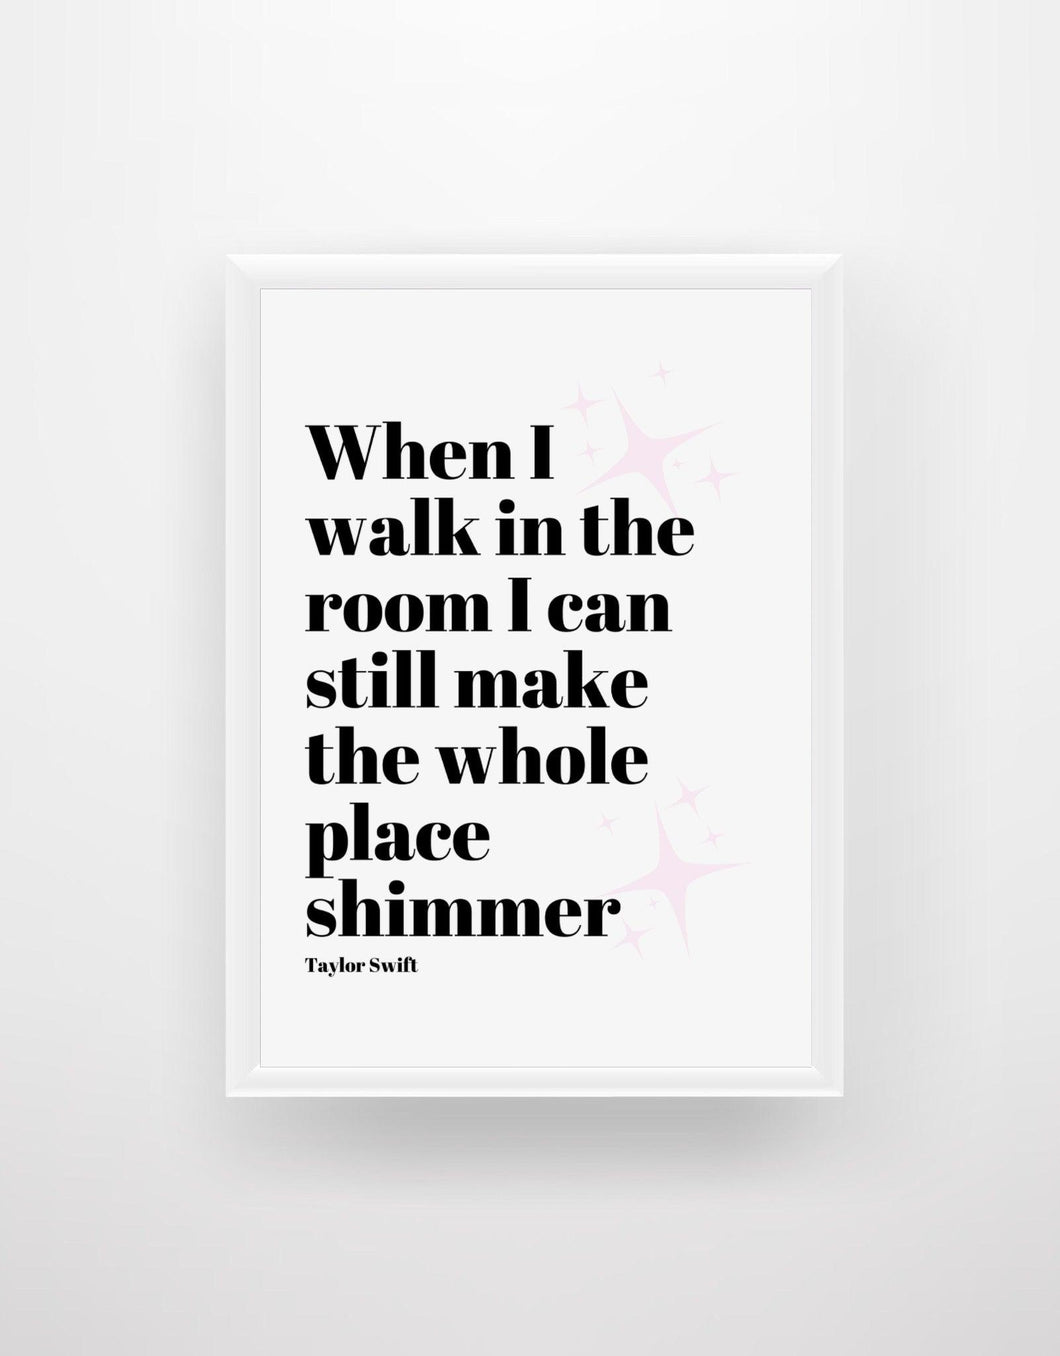 When I walk in the room I can still make the whole place shimmer - Taylor Swift - Chic Prints